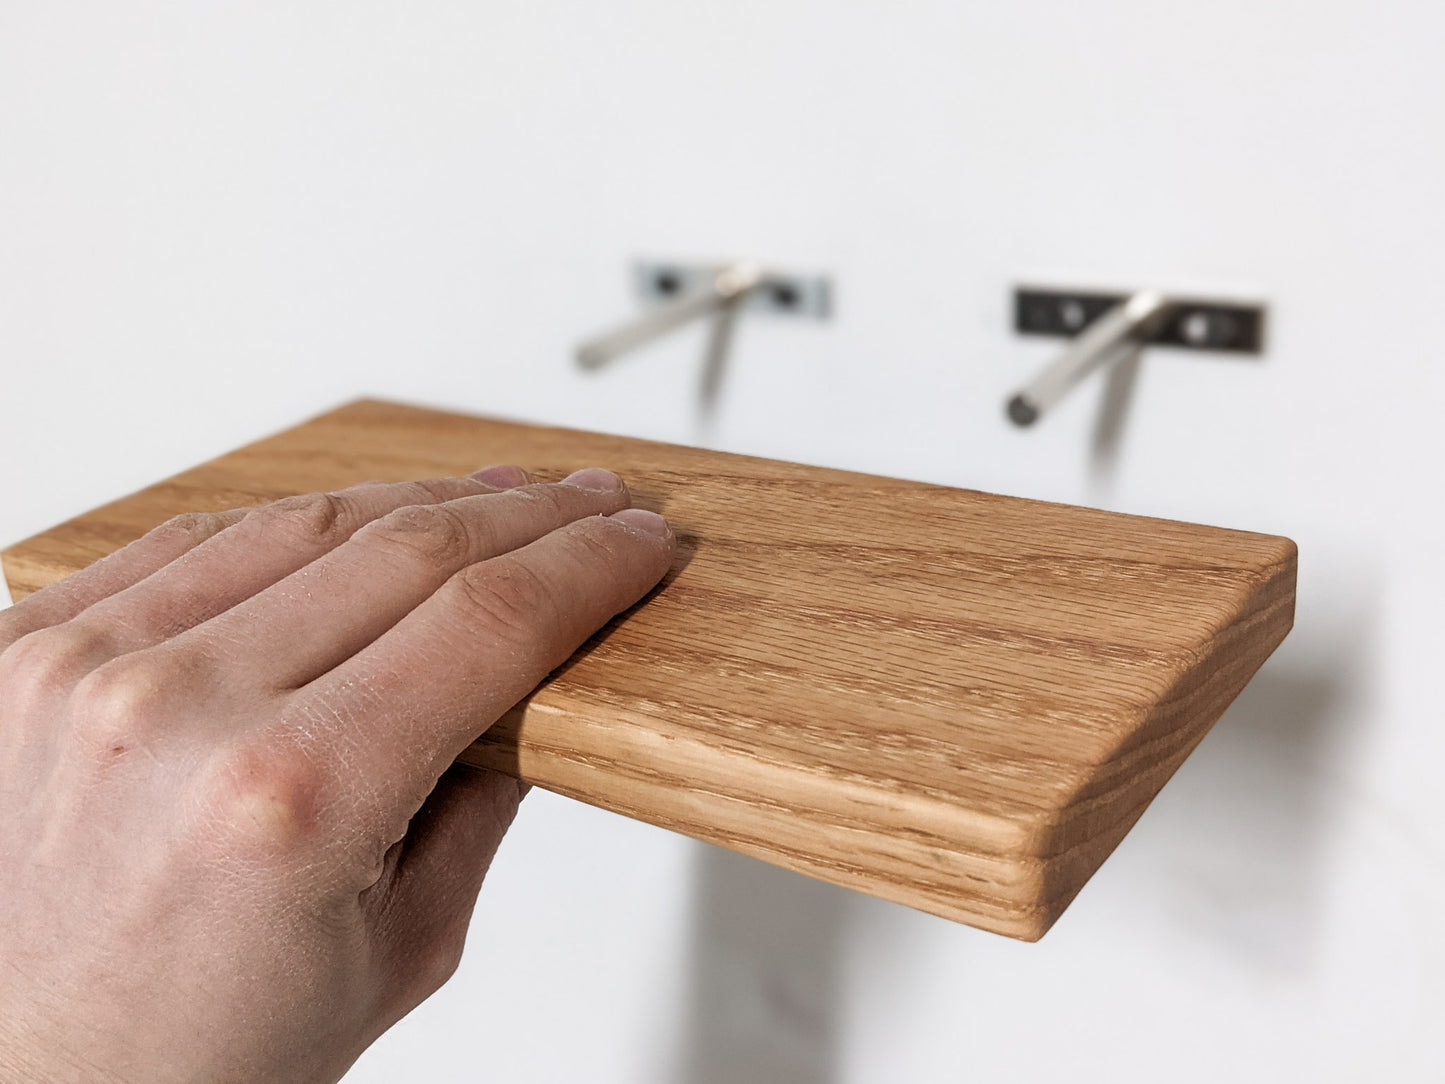 A hand holds a small, rectangular, floating oak wood shelf in the foreground. In the background, two silver rods protrude from the invisible bracket.